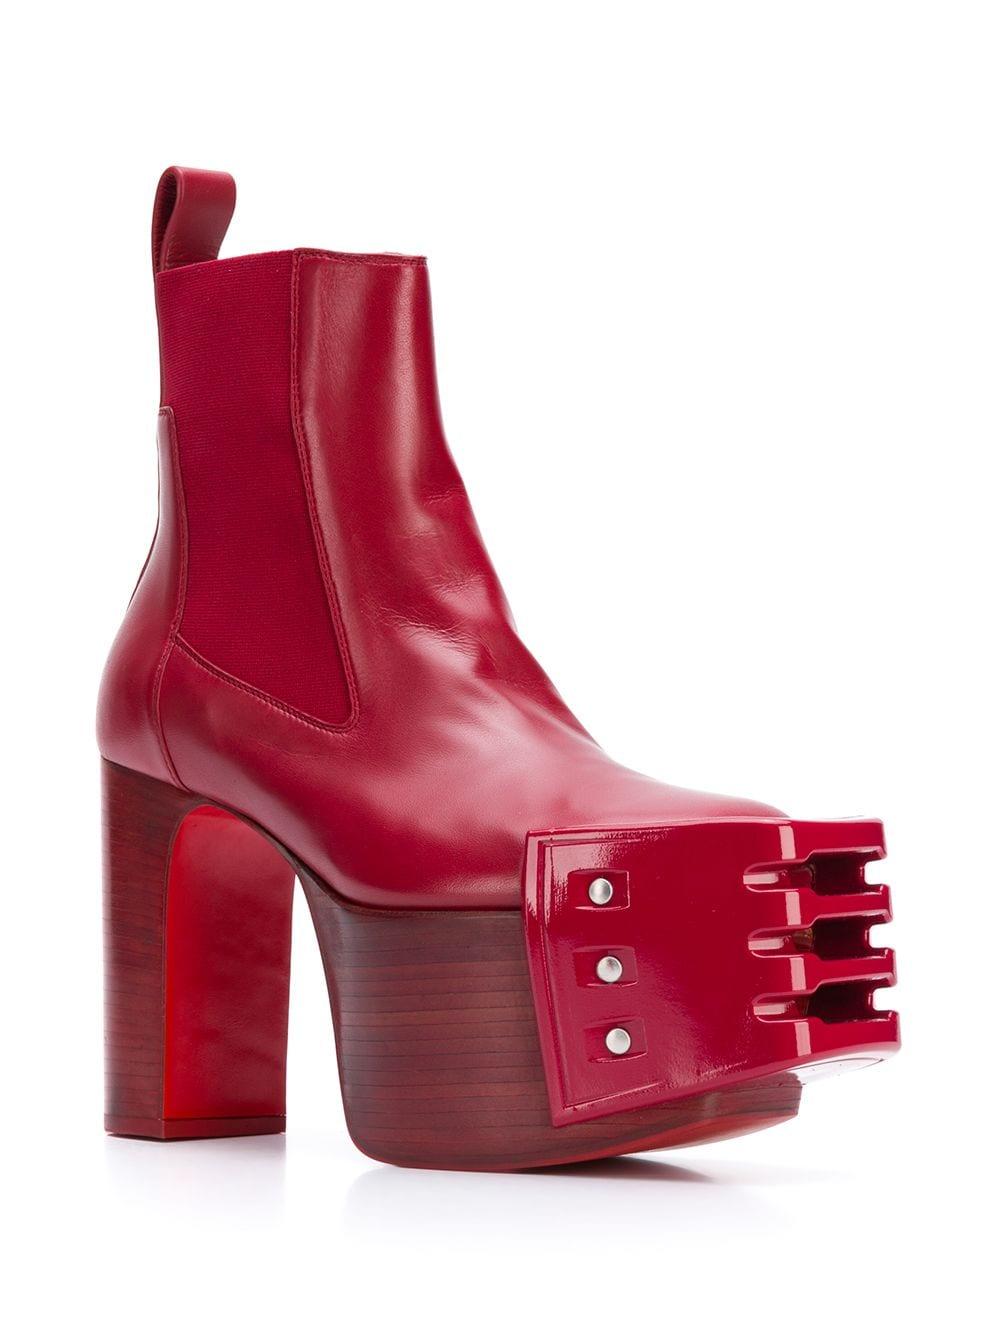 Rick Owens Larry Grill Kiss Ankle Boots in Red | Lyst Canada